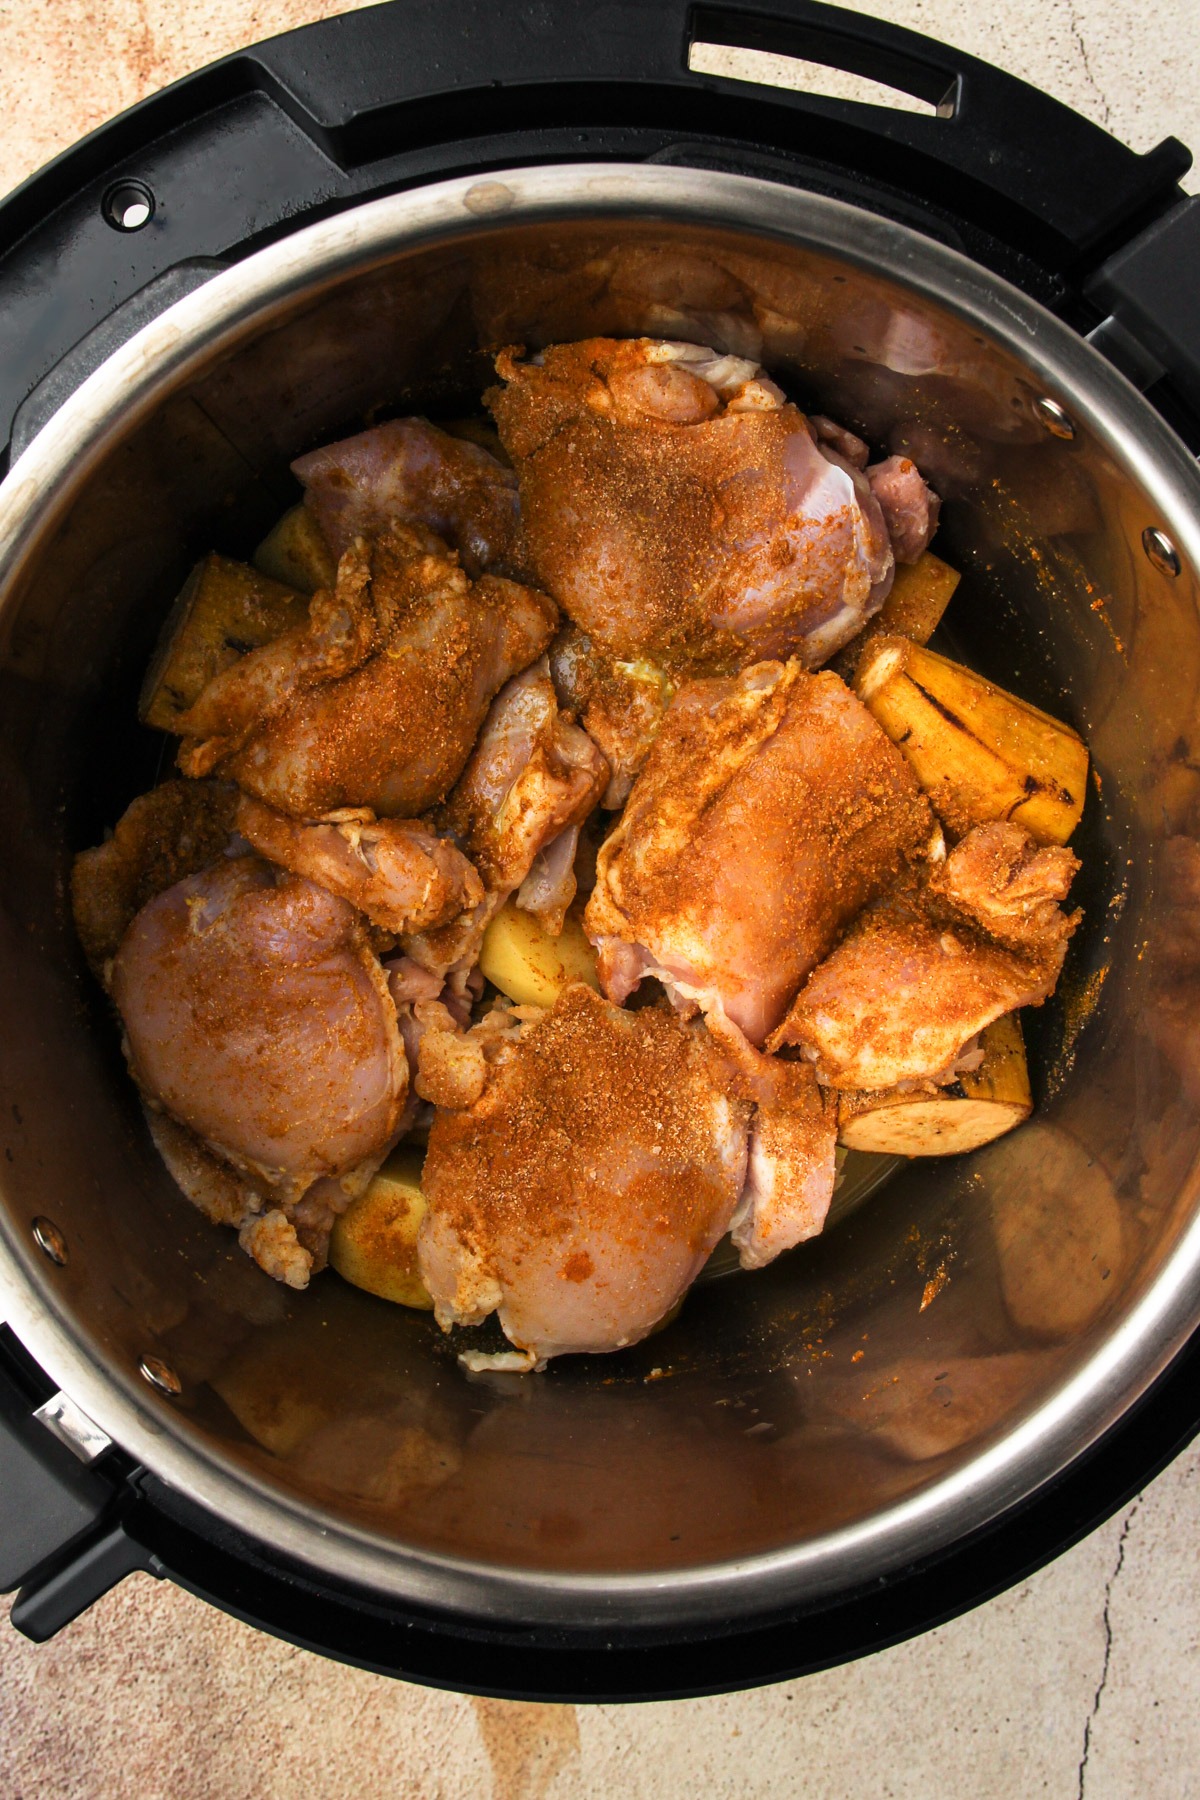 Uncooked colombian chicken stew in a pressure cooker.